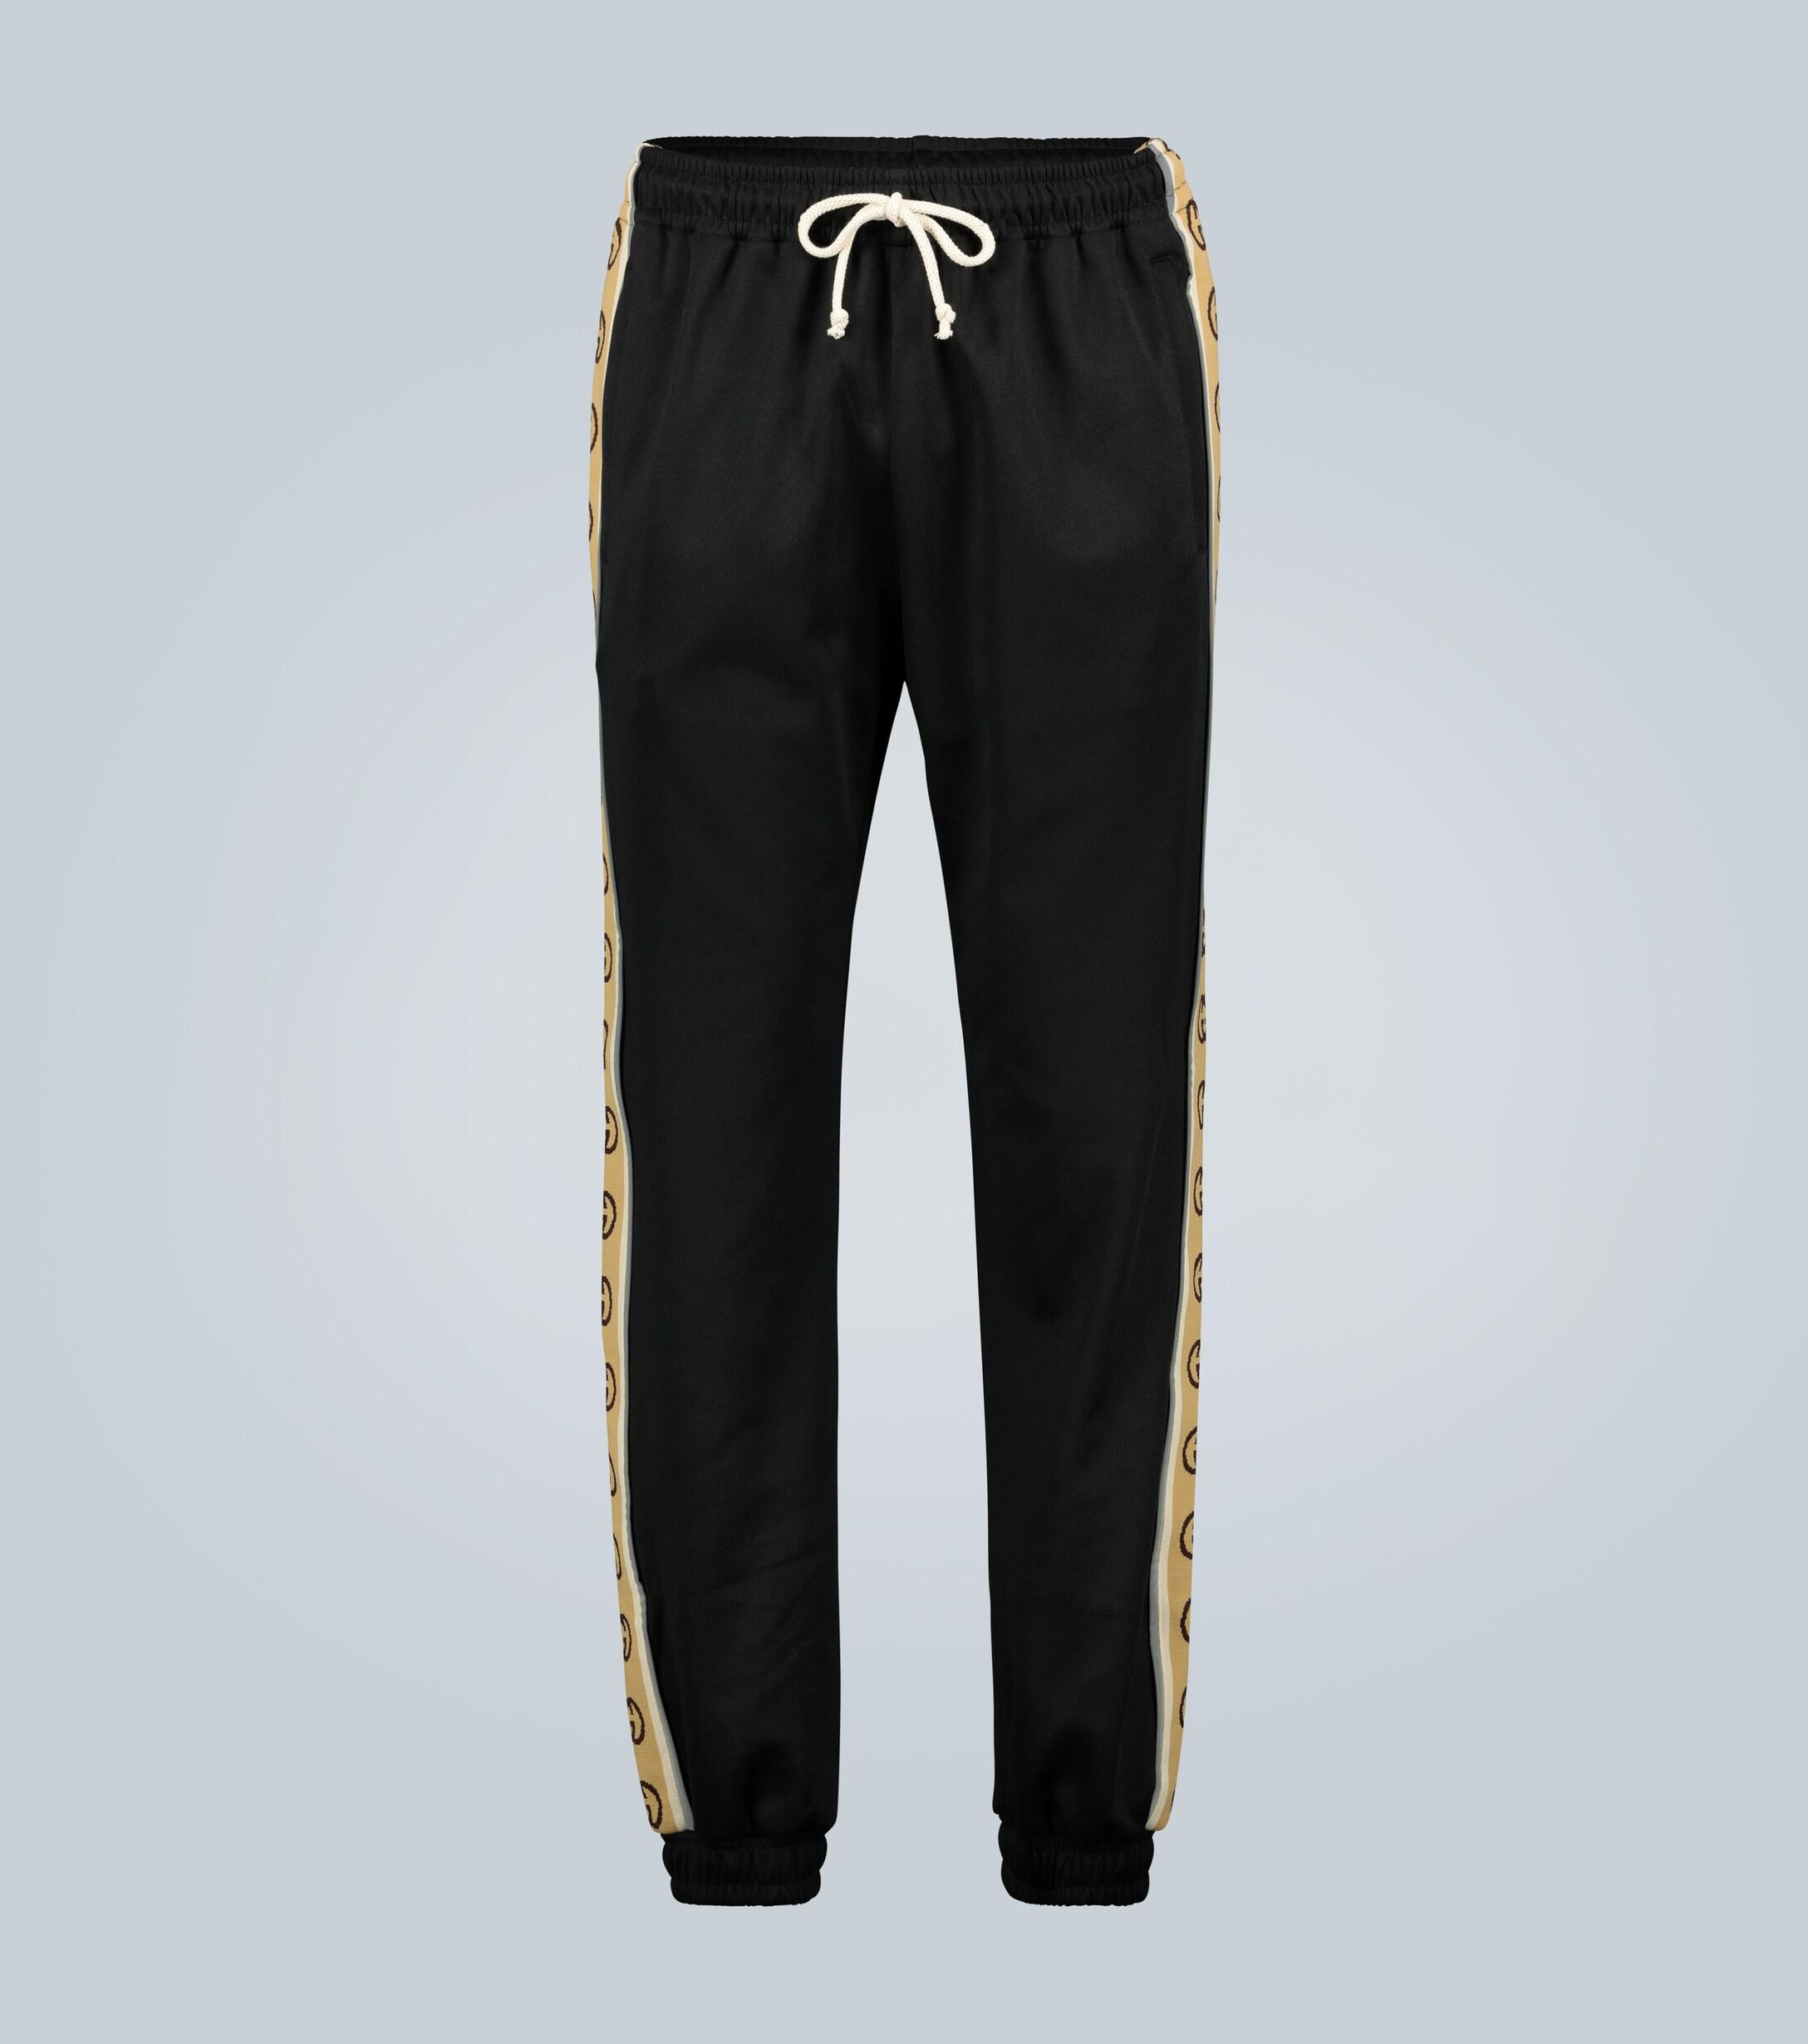 Gucci Technical Jersey Track Pants W/side Band in Black for Men - Lyst